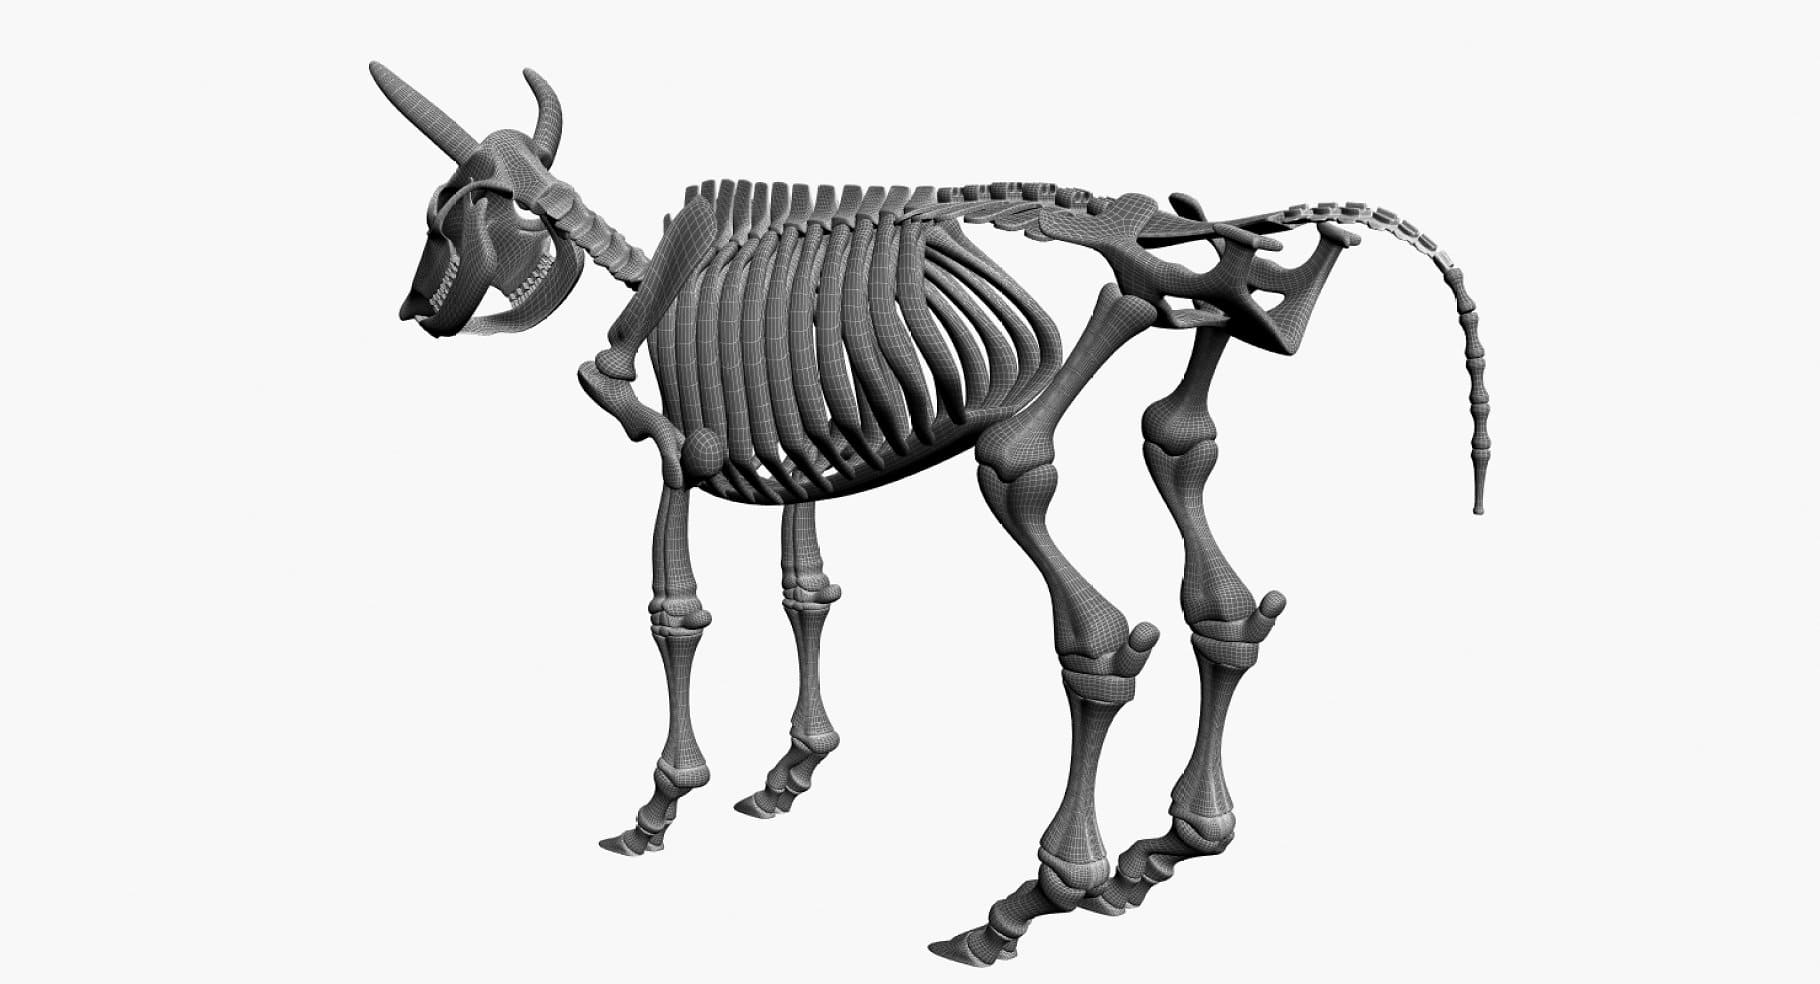 An image with a detailed drawing of the skeleton of cattle.